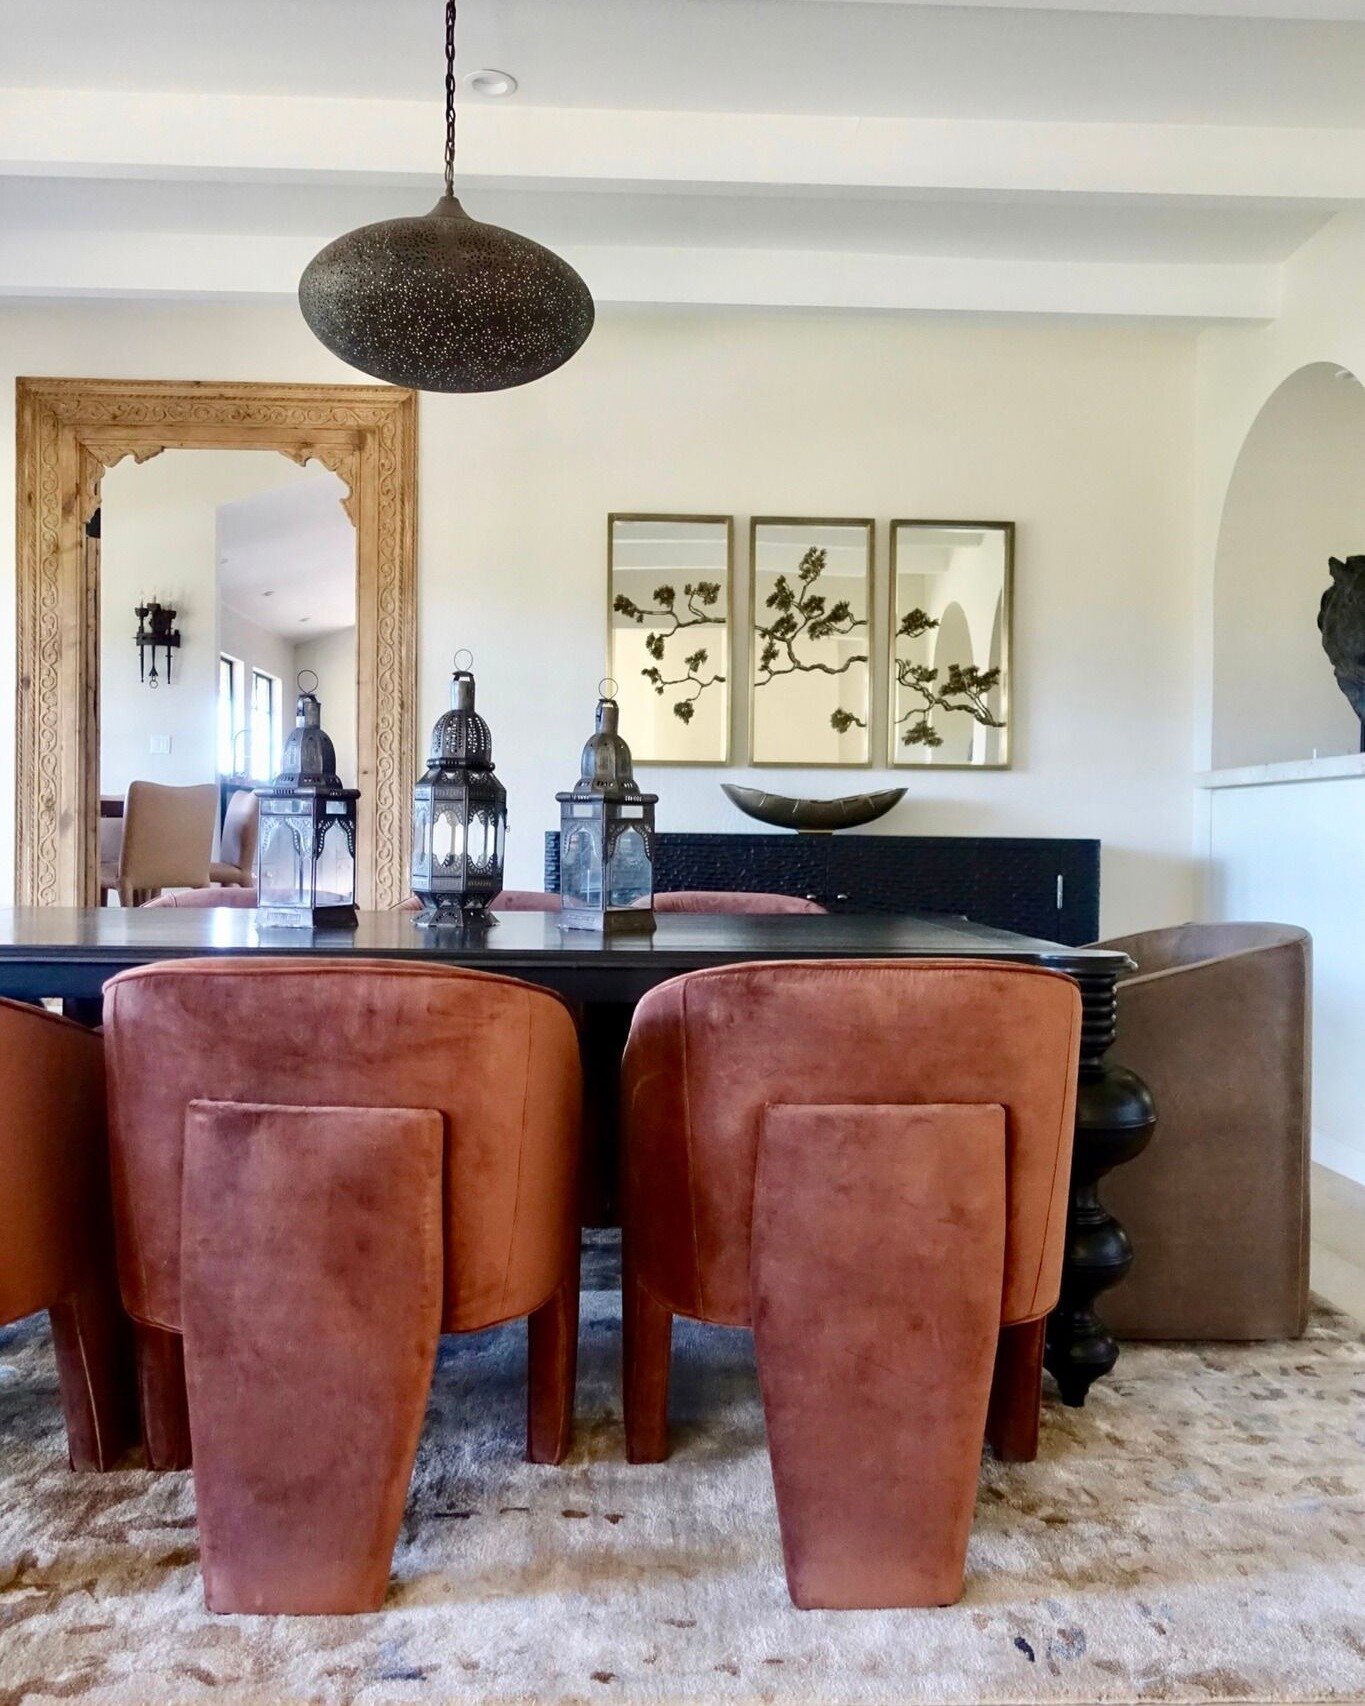 This eclectic home in Palo Alto has been so much fun to remodel and furnish. We selected some unique furnishings for a modern Moroccan twist in the Dining.

#austininteriordesign #austininteriordesigner #austindesign #atxhome #austinhome #austindesig